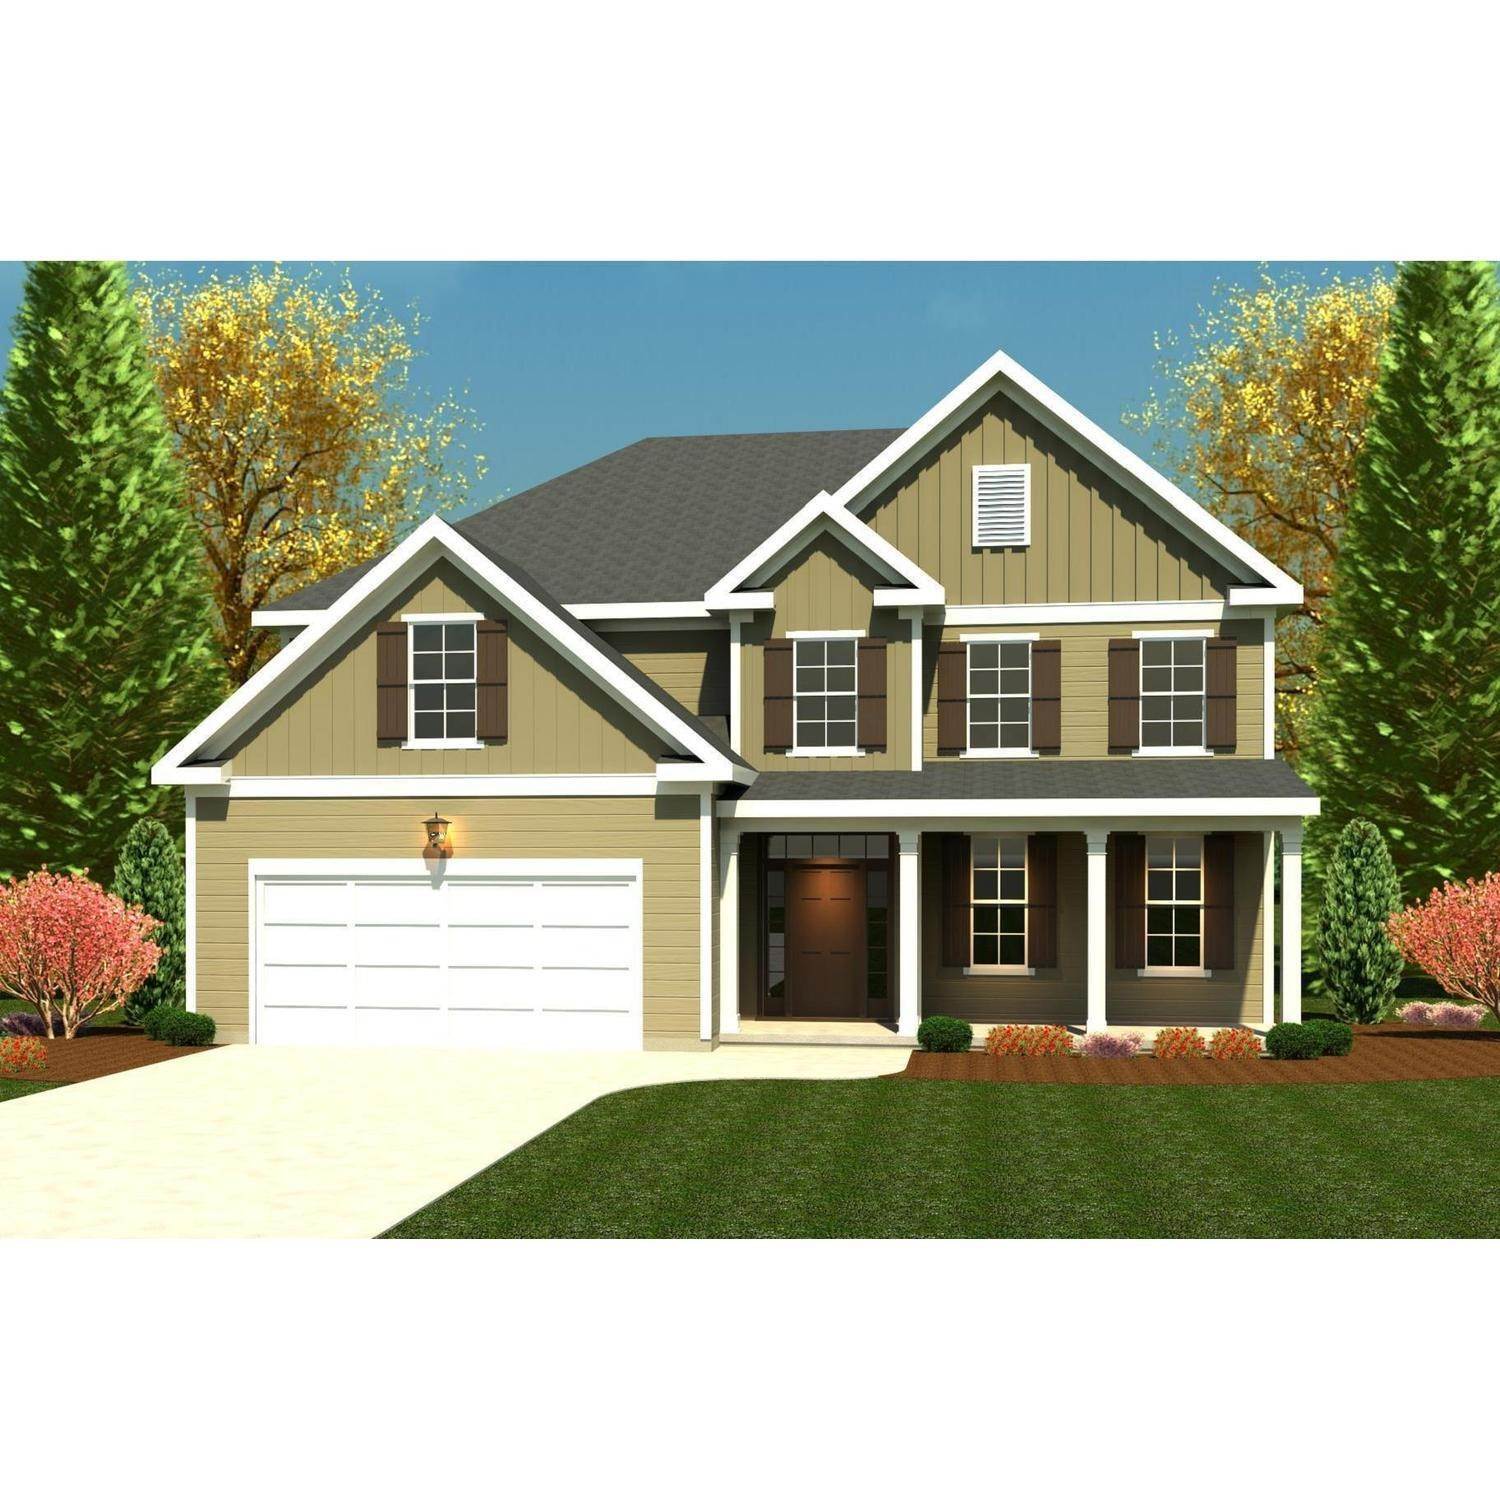 Single Family for Sale at Crawford Creek - Nottaway 2045 Sinclair Drive GROVETOWN, GEORGIA 30813 UNITED STATES